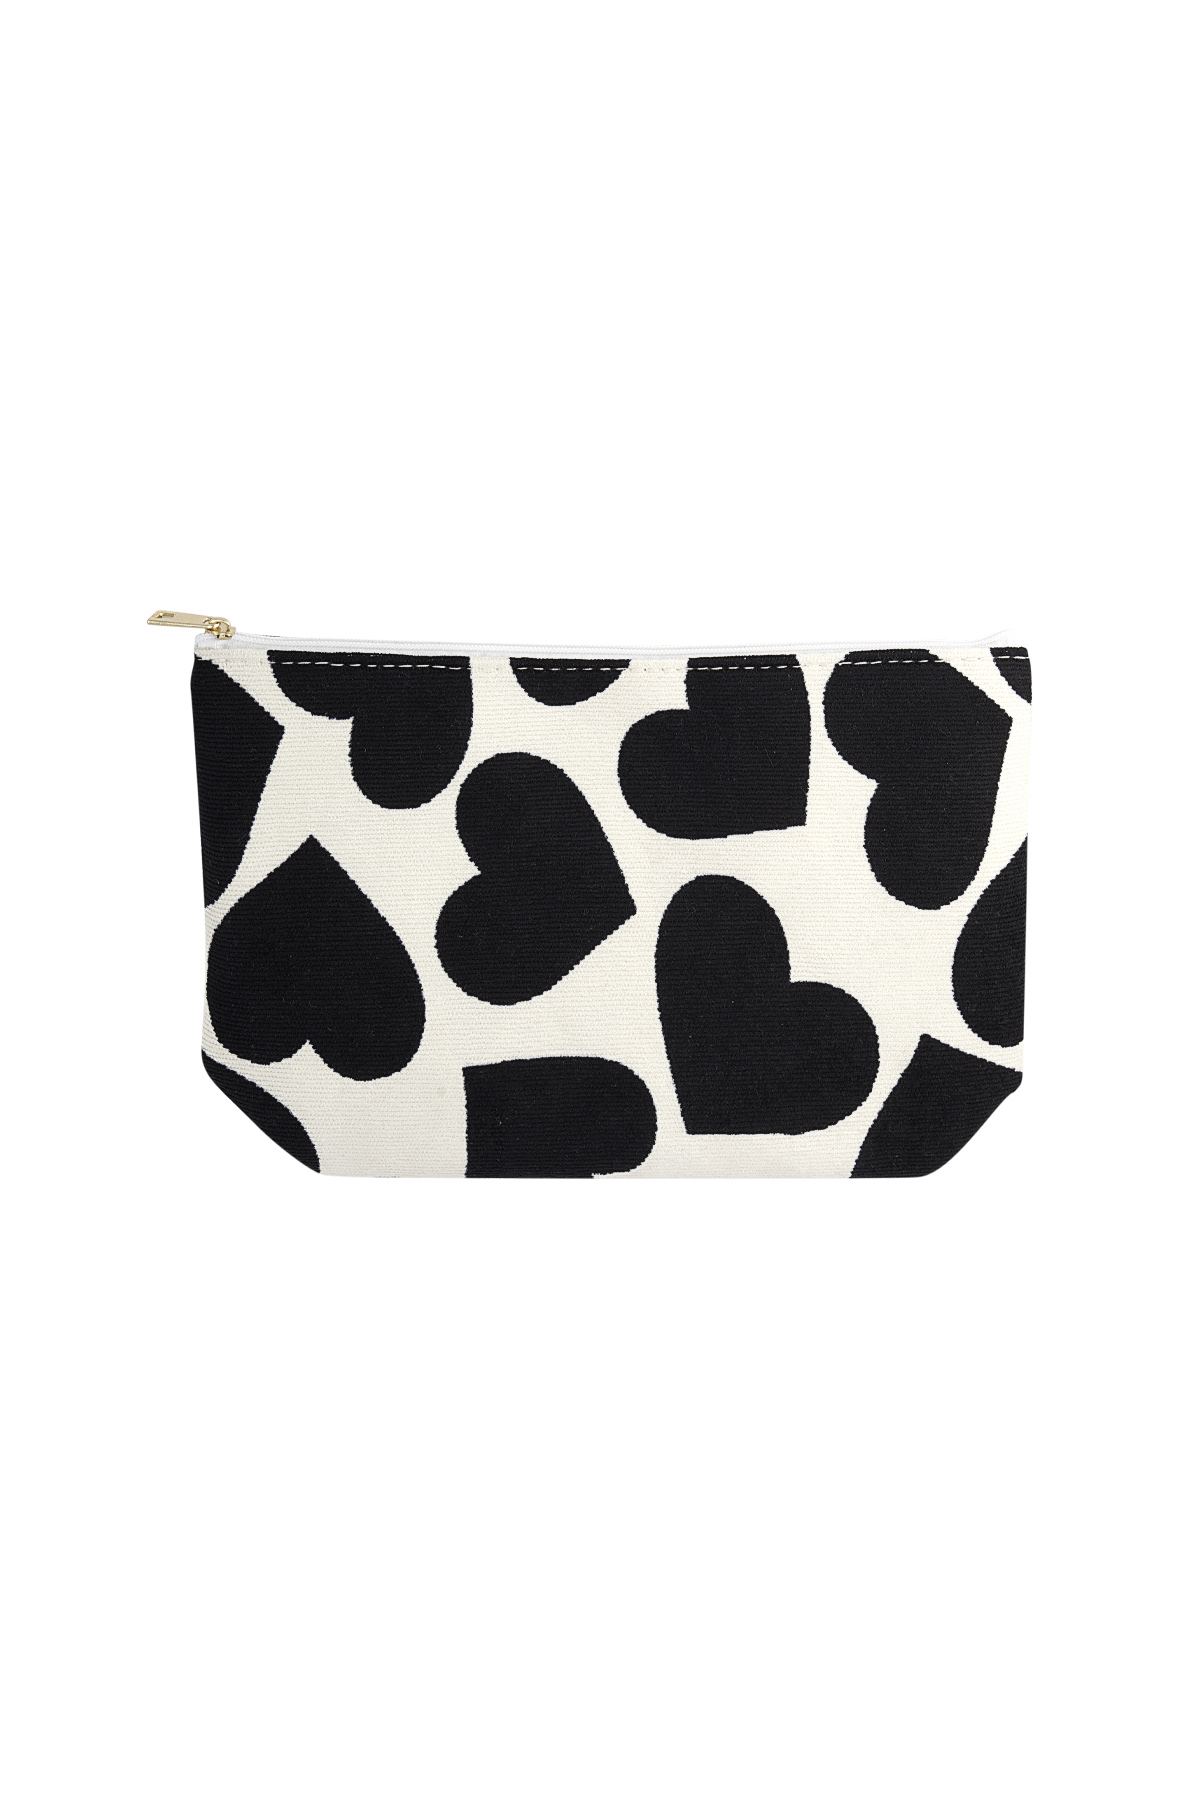 Make-up bag with hearts - black and white